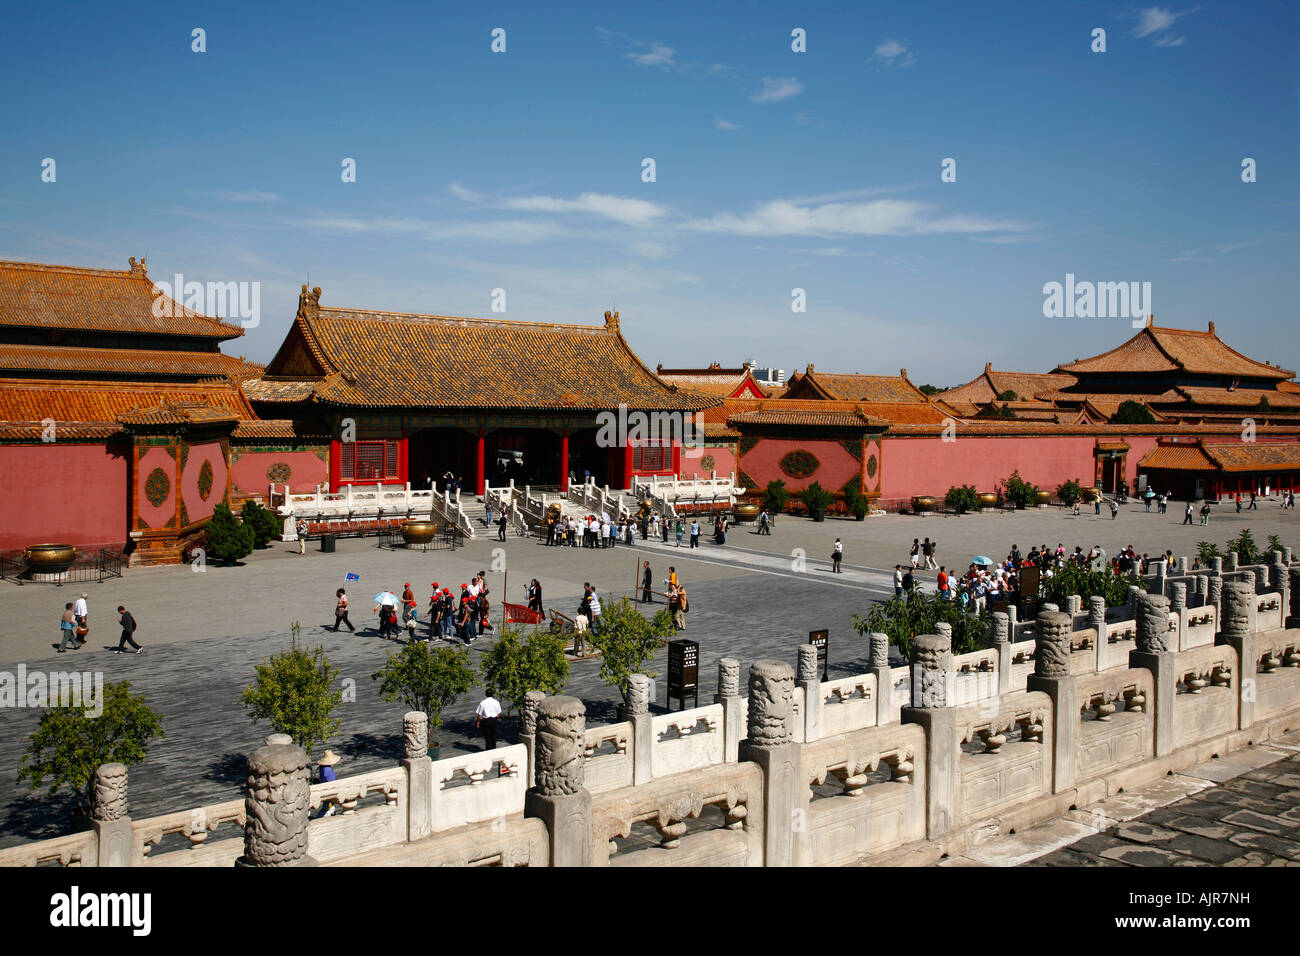 People at the Forbidden city Beijing China Stock Photo